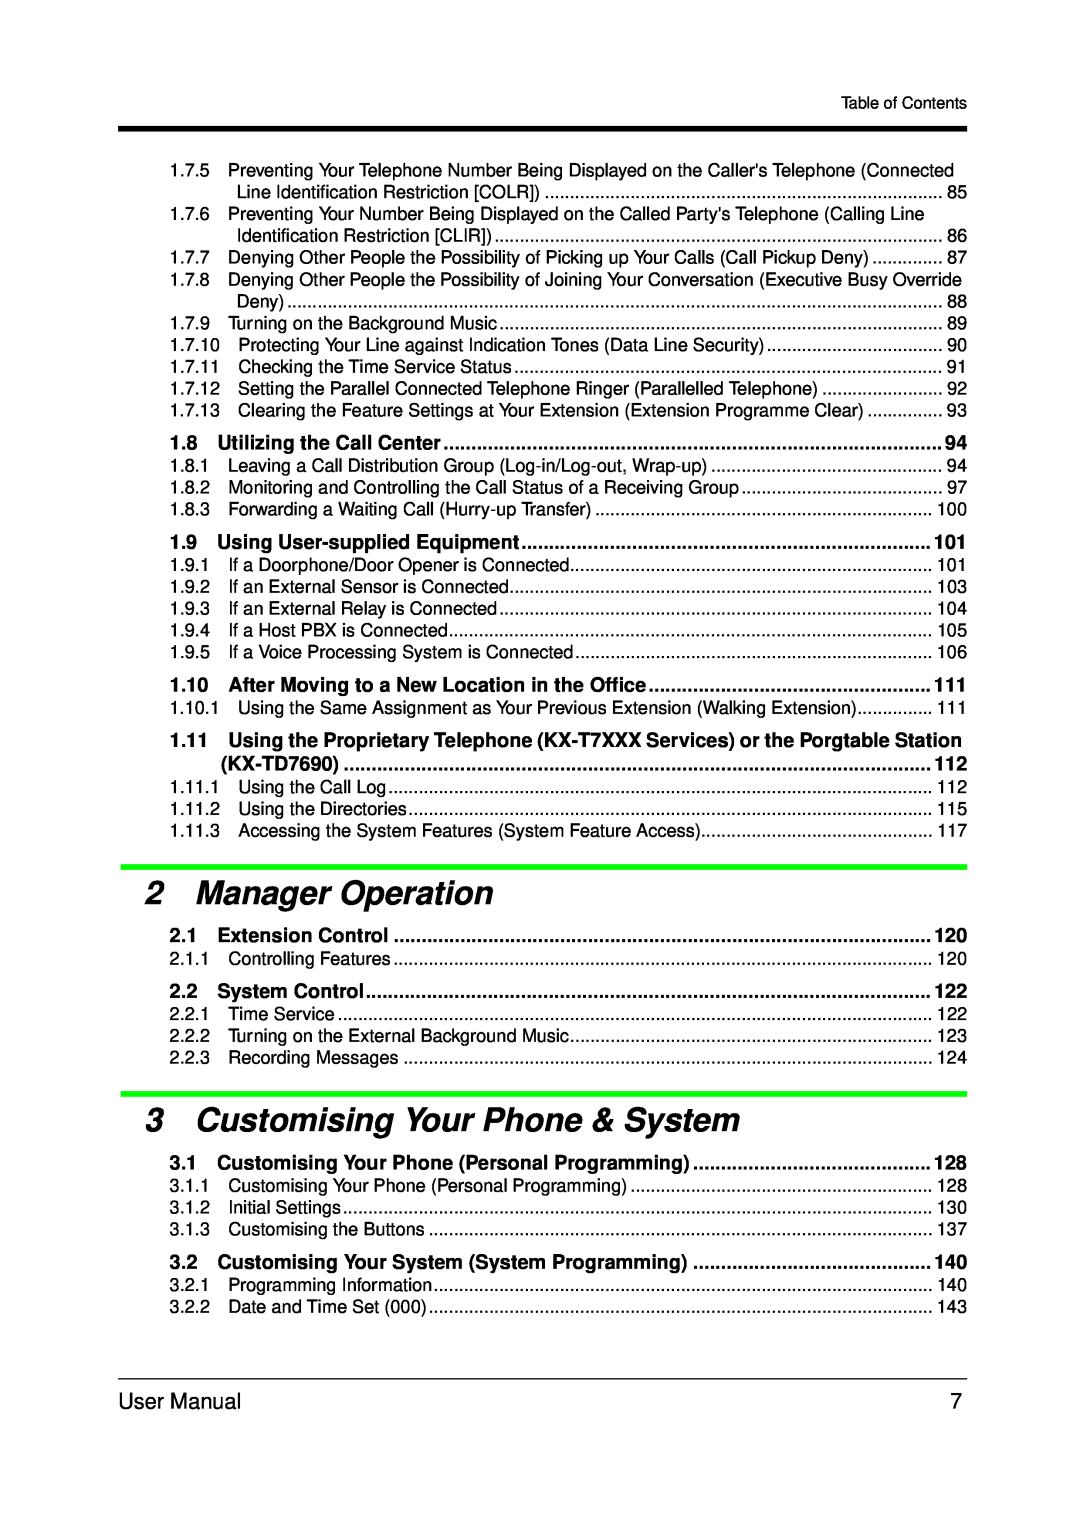 Panasonic KX-TDA200 user manual Manager Operation, Customising Your Phone & System 